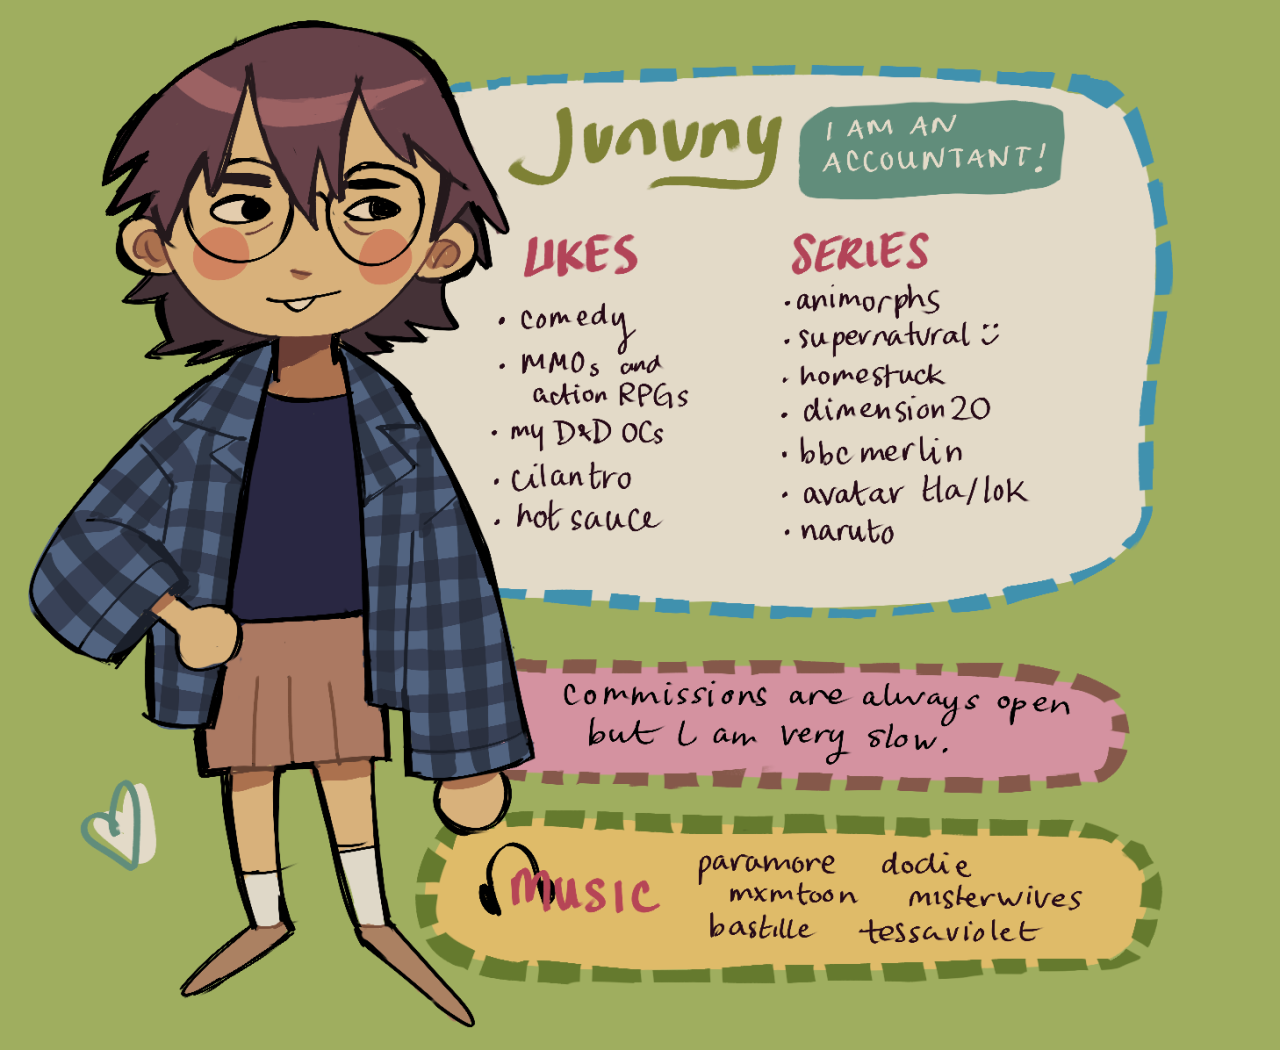 ❖ TWITTER: JUNUNYX ❖ MAIN BLOG: DEADCASTIEL ❖
• im 29, chinese, INTJ, capricorn
• this is a sideblog for my art
• my main blog is for reblogs / chatting / everything else
❖ NAVIGATION ❖
• MY D&D OCs
• FAQ
• TAG LIST
• COMMISSIONS